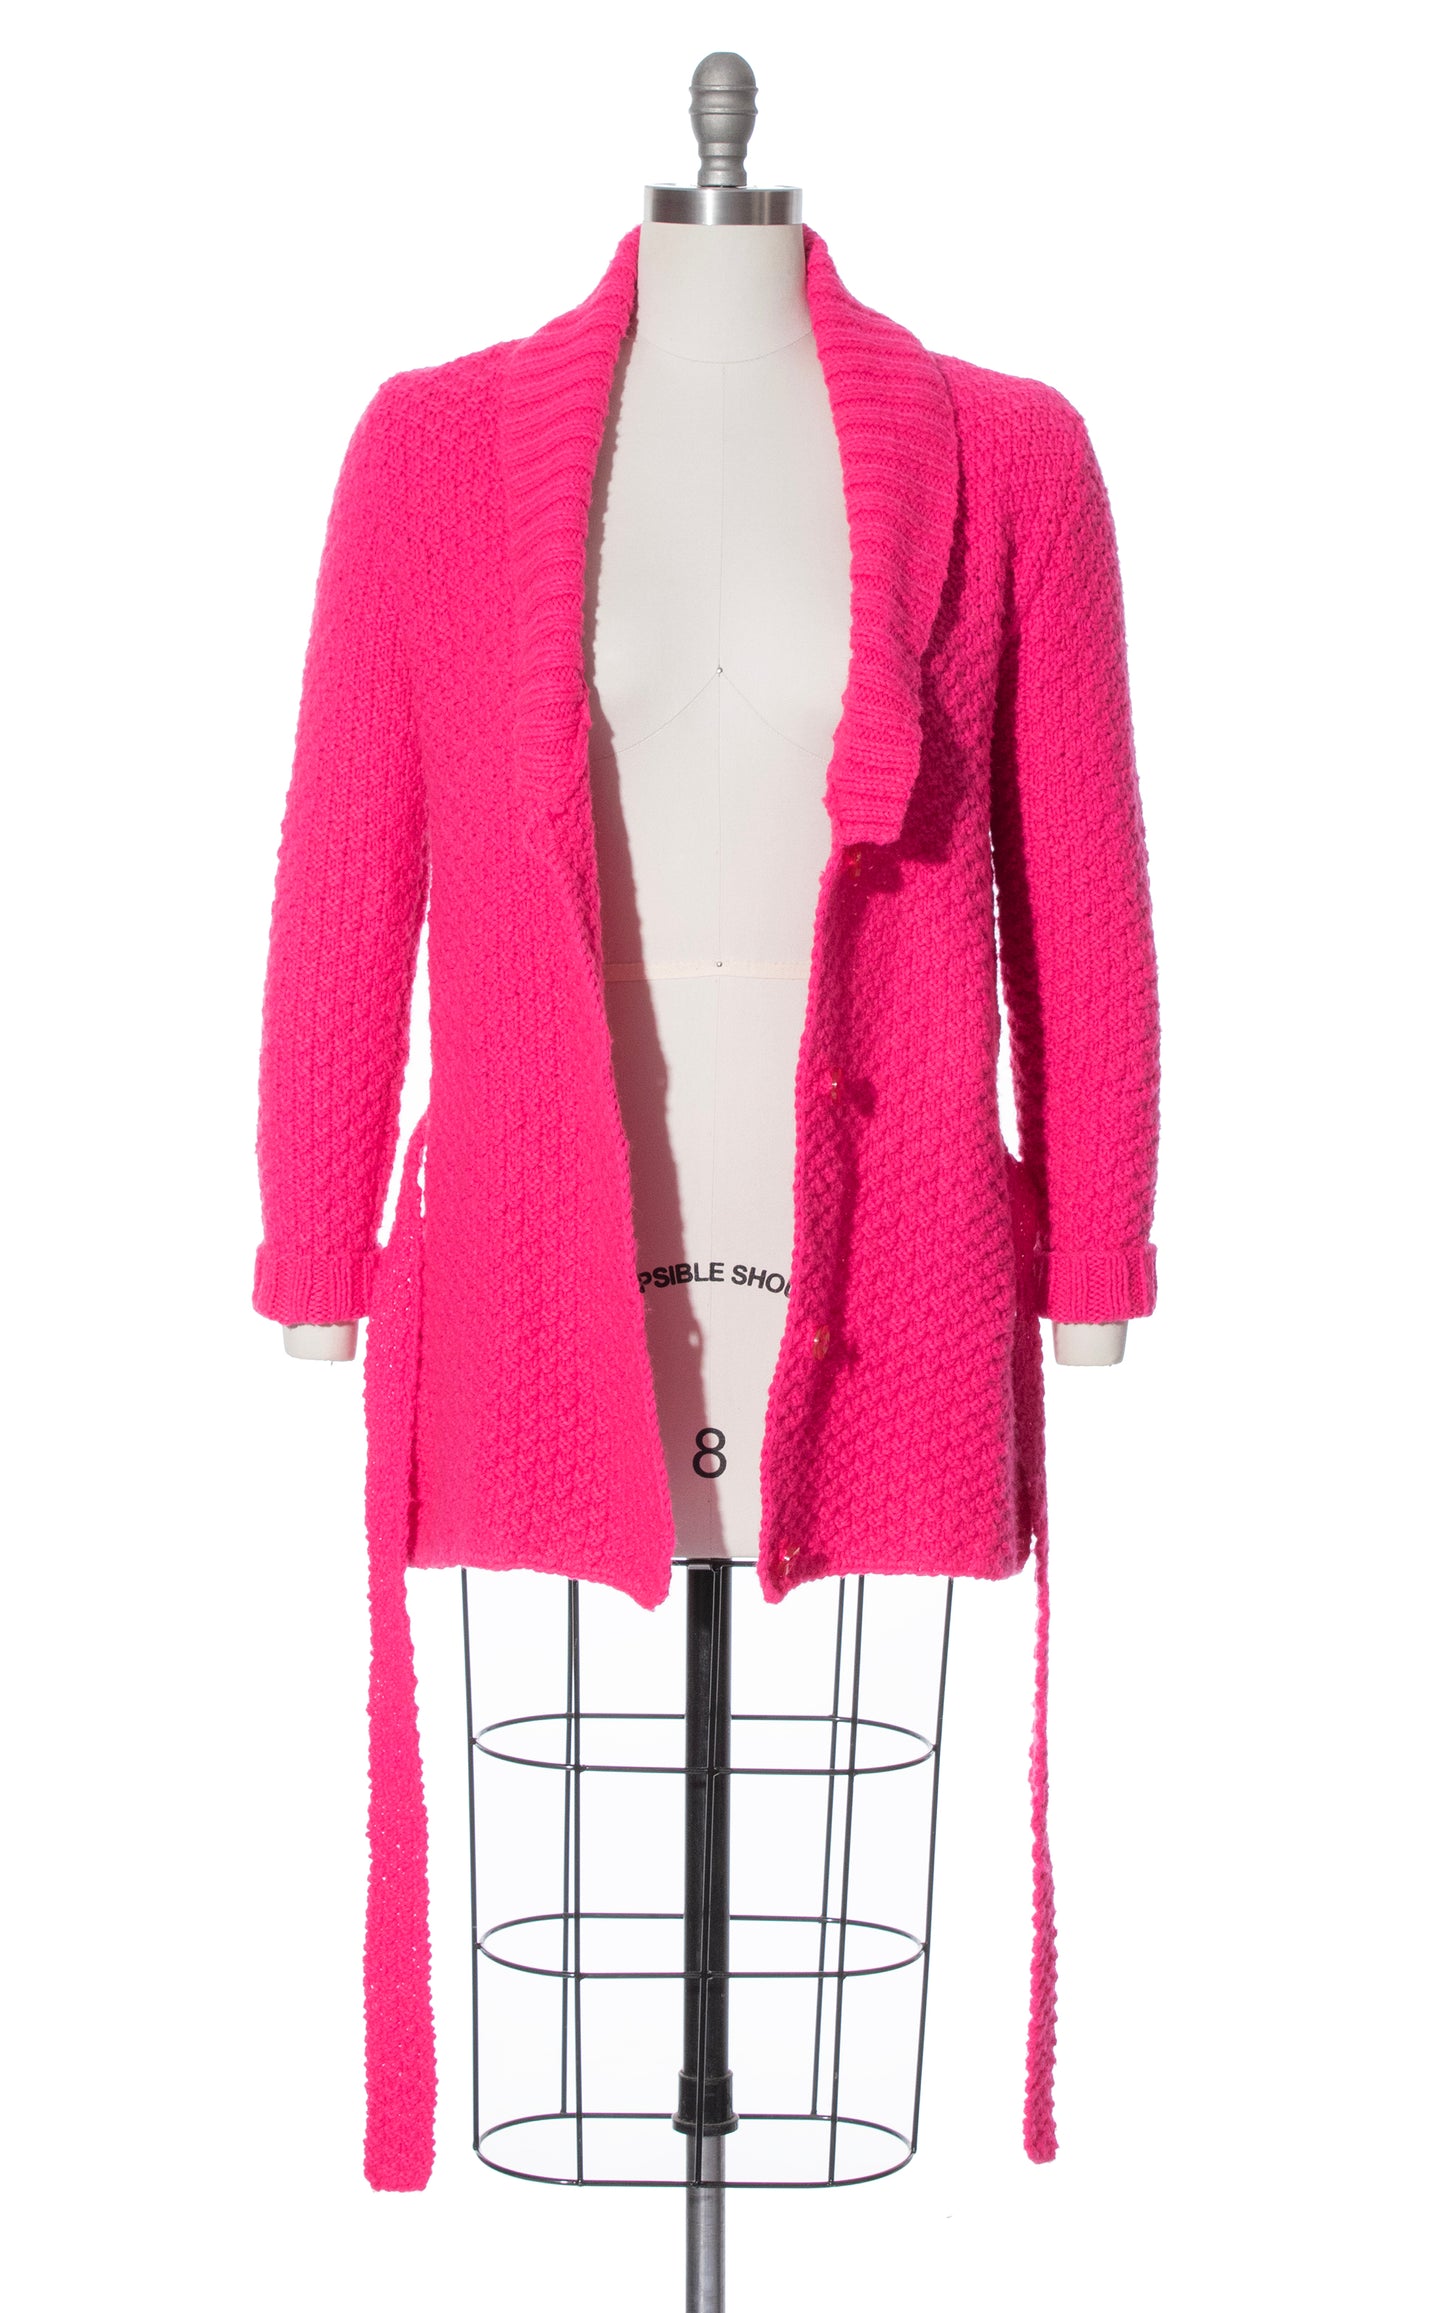 VIntage 70s 1970s Hot Pink Knit Belted Cardigan Acrylic Sweater Coat BirthdayLifeVintage